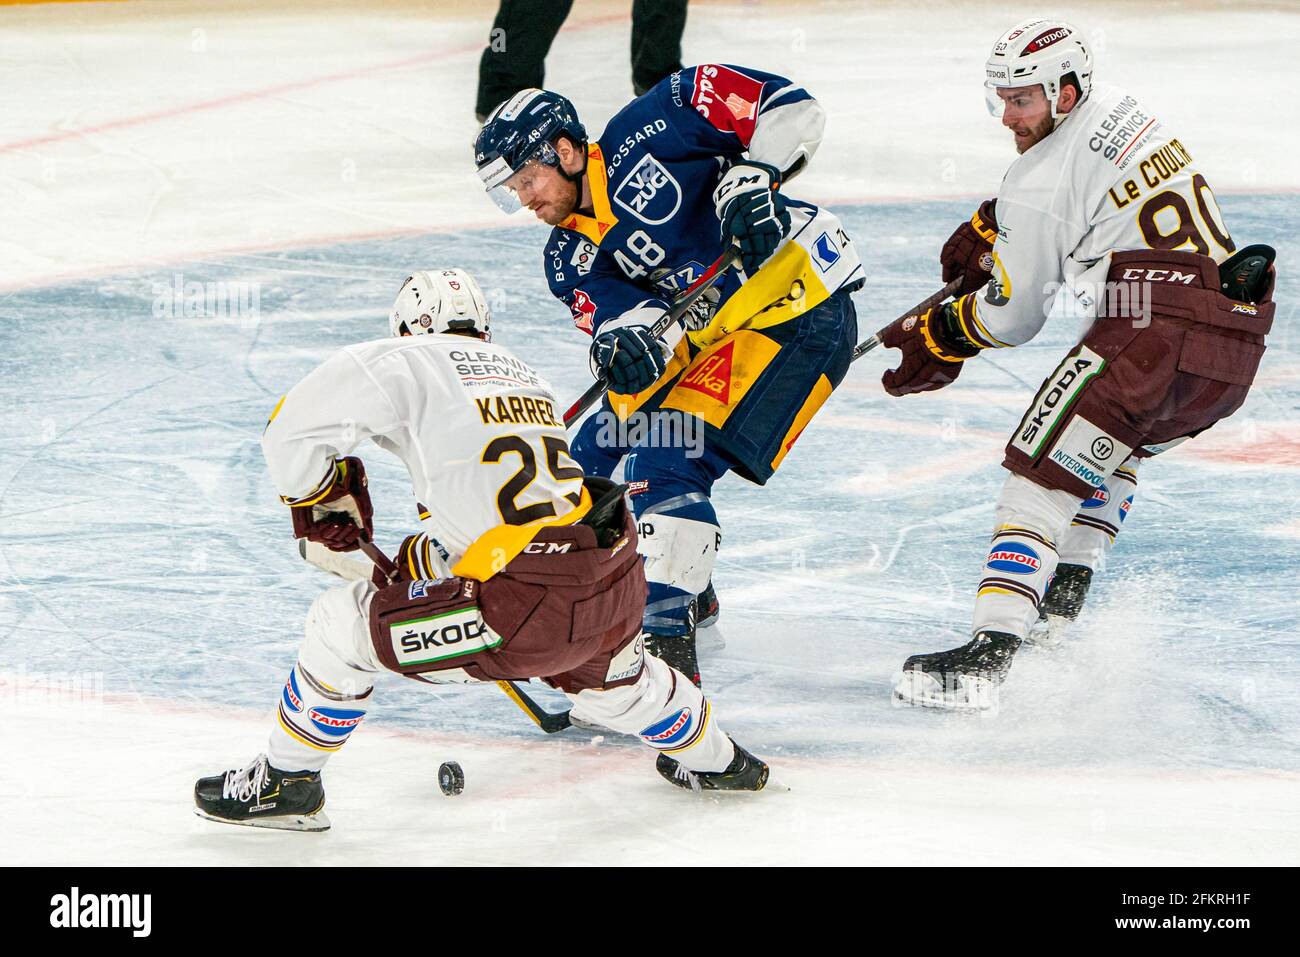 # 90 Simon Le Coultre (Geneva) and # 25 Roger Karrer (Geneva) stop Carl Klingberg # 48 (EV Zug) during the National League Playoff Final ice hockey game 1 between EV Zug and Geneve-Servette HC on May 3rd, 2021 in Bossard Arena in Zug. (Switzerland/Croatia OUT) Credit: SPP Sport Press Photo. /Alamy Live News Stock Photo